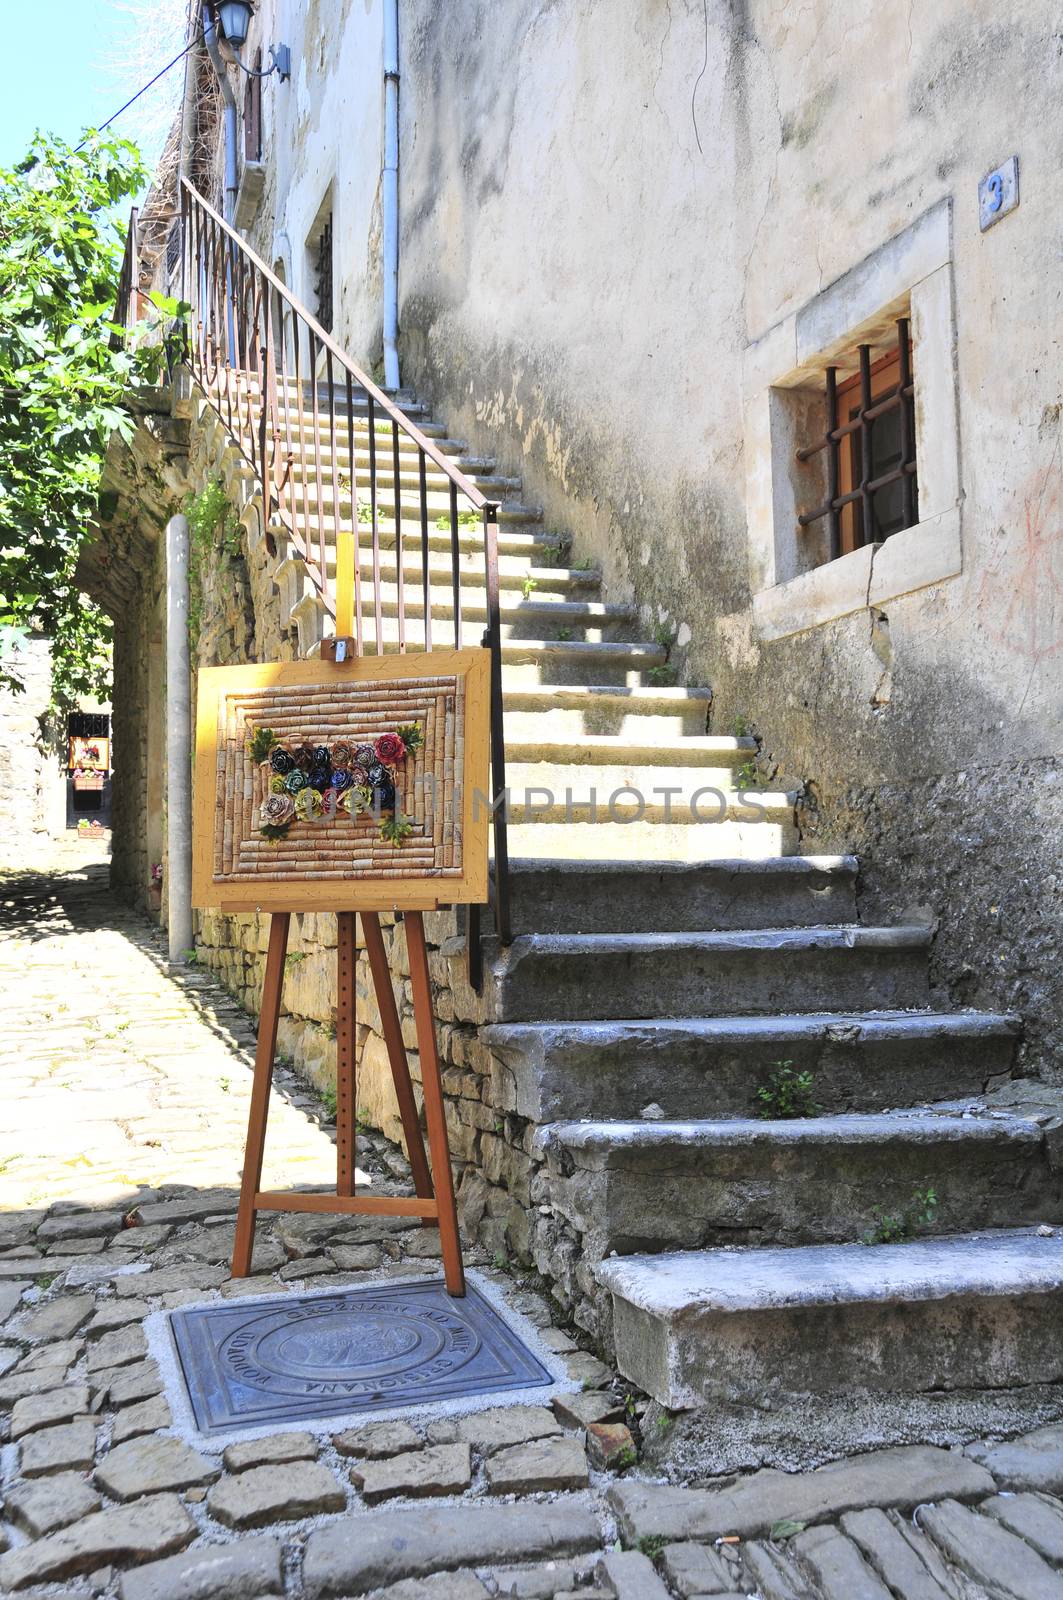 Artwork in from of stairs to artist's shop by asafaric